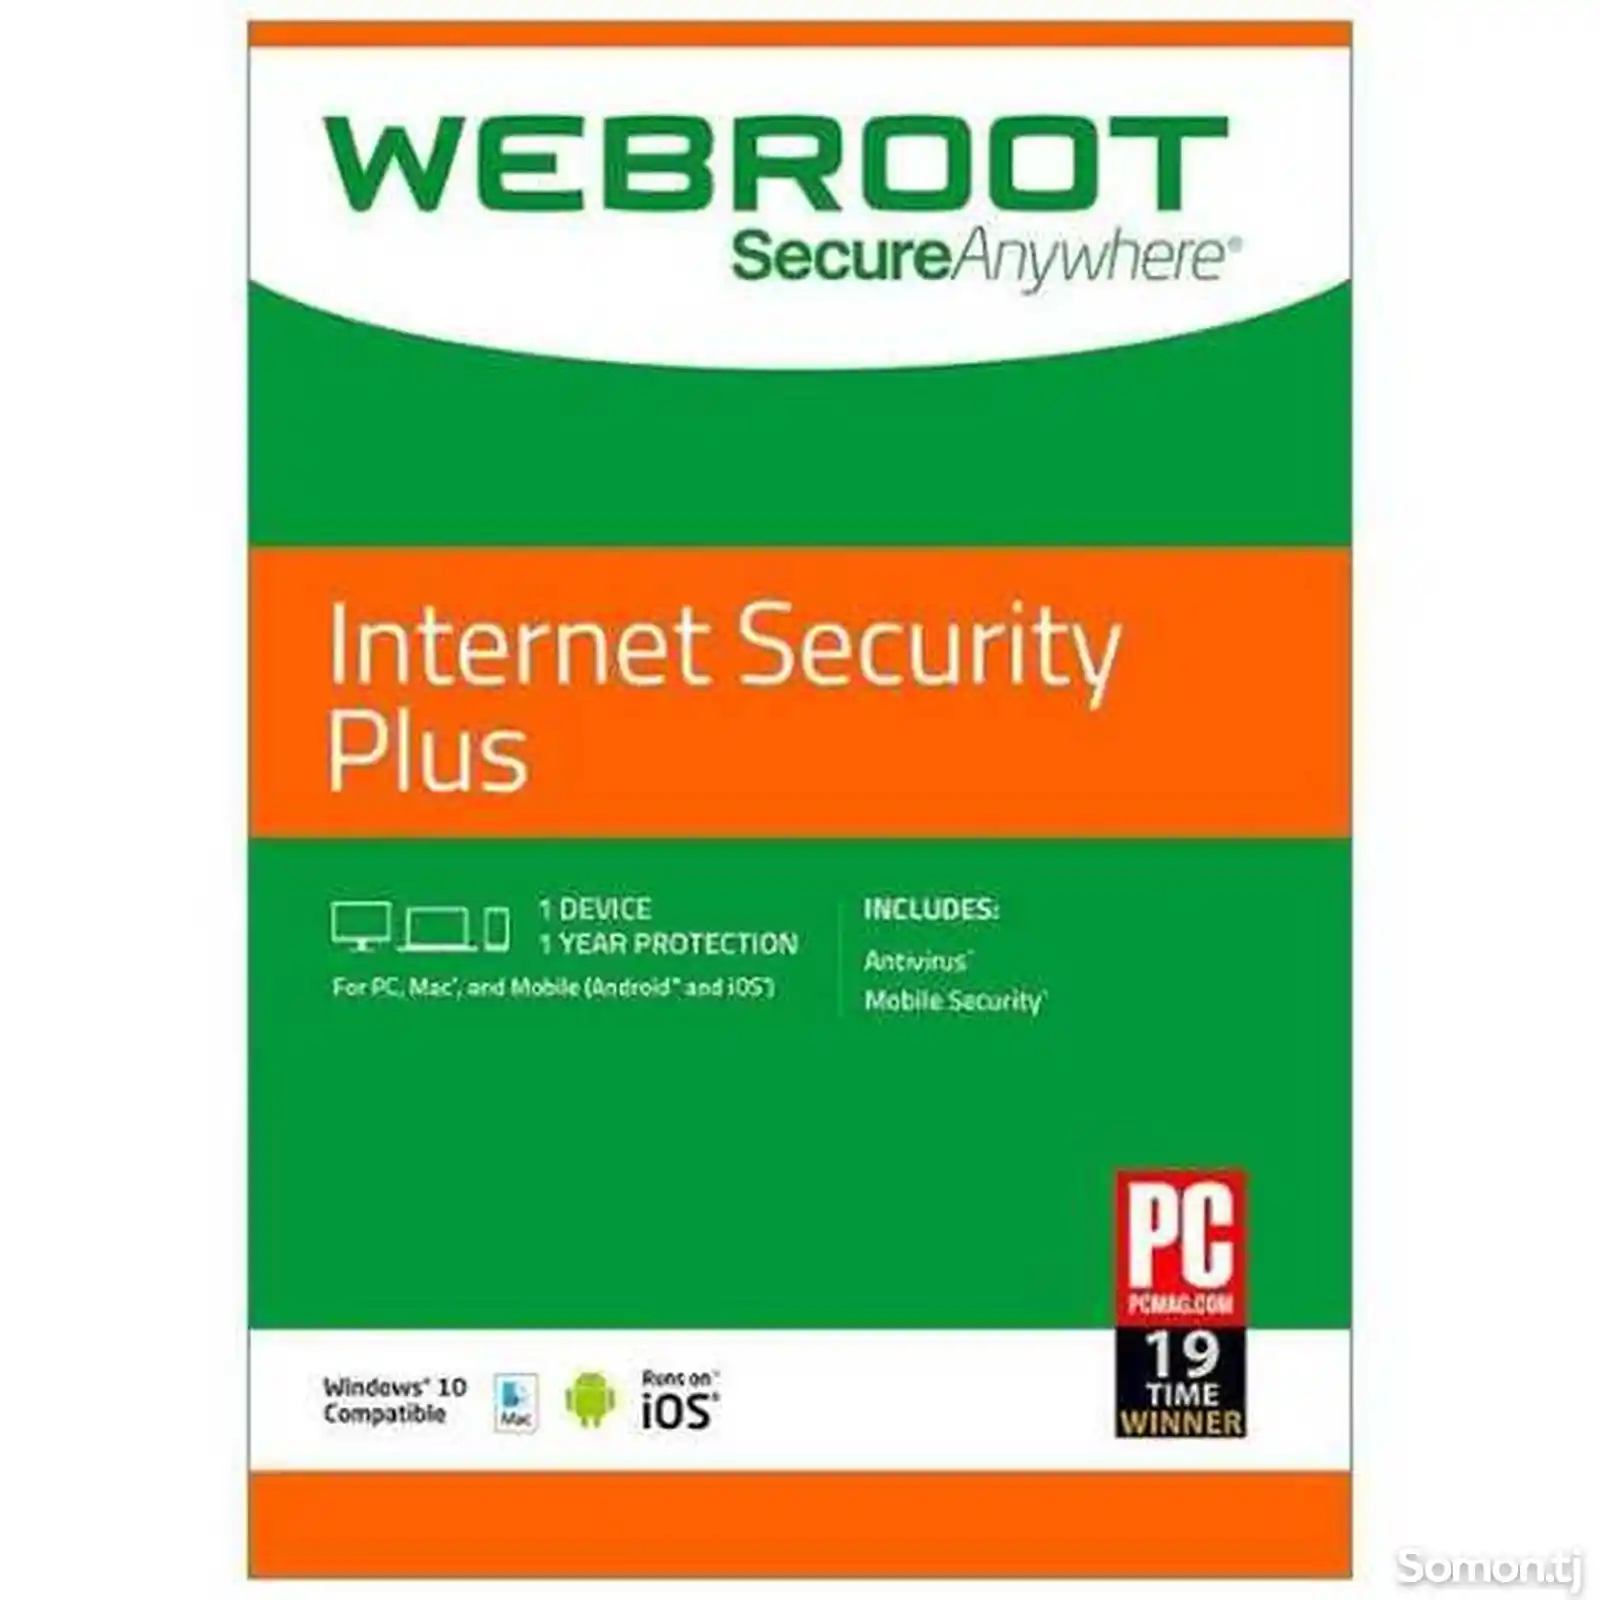 Webroot SecureAnywhere Internet Security Plus - барои 1 роёна, 1 сол-1